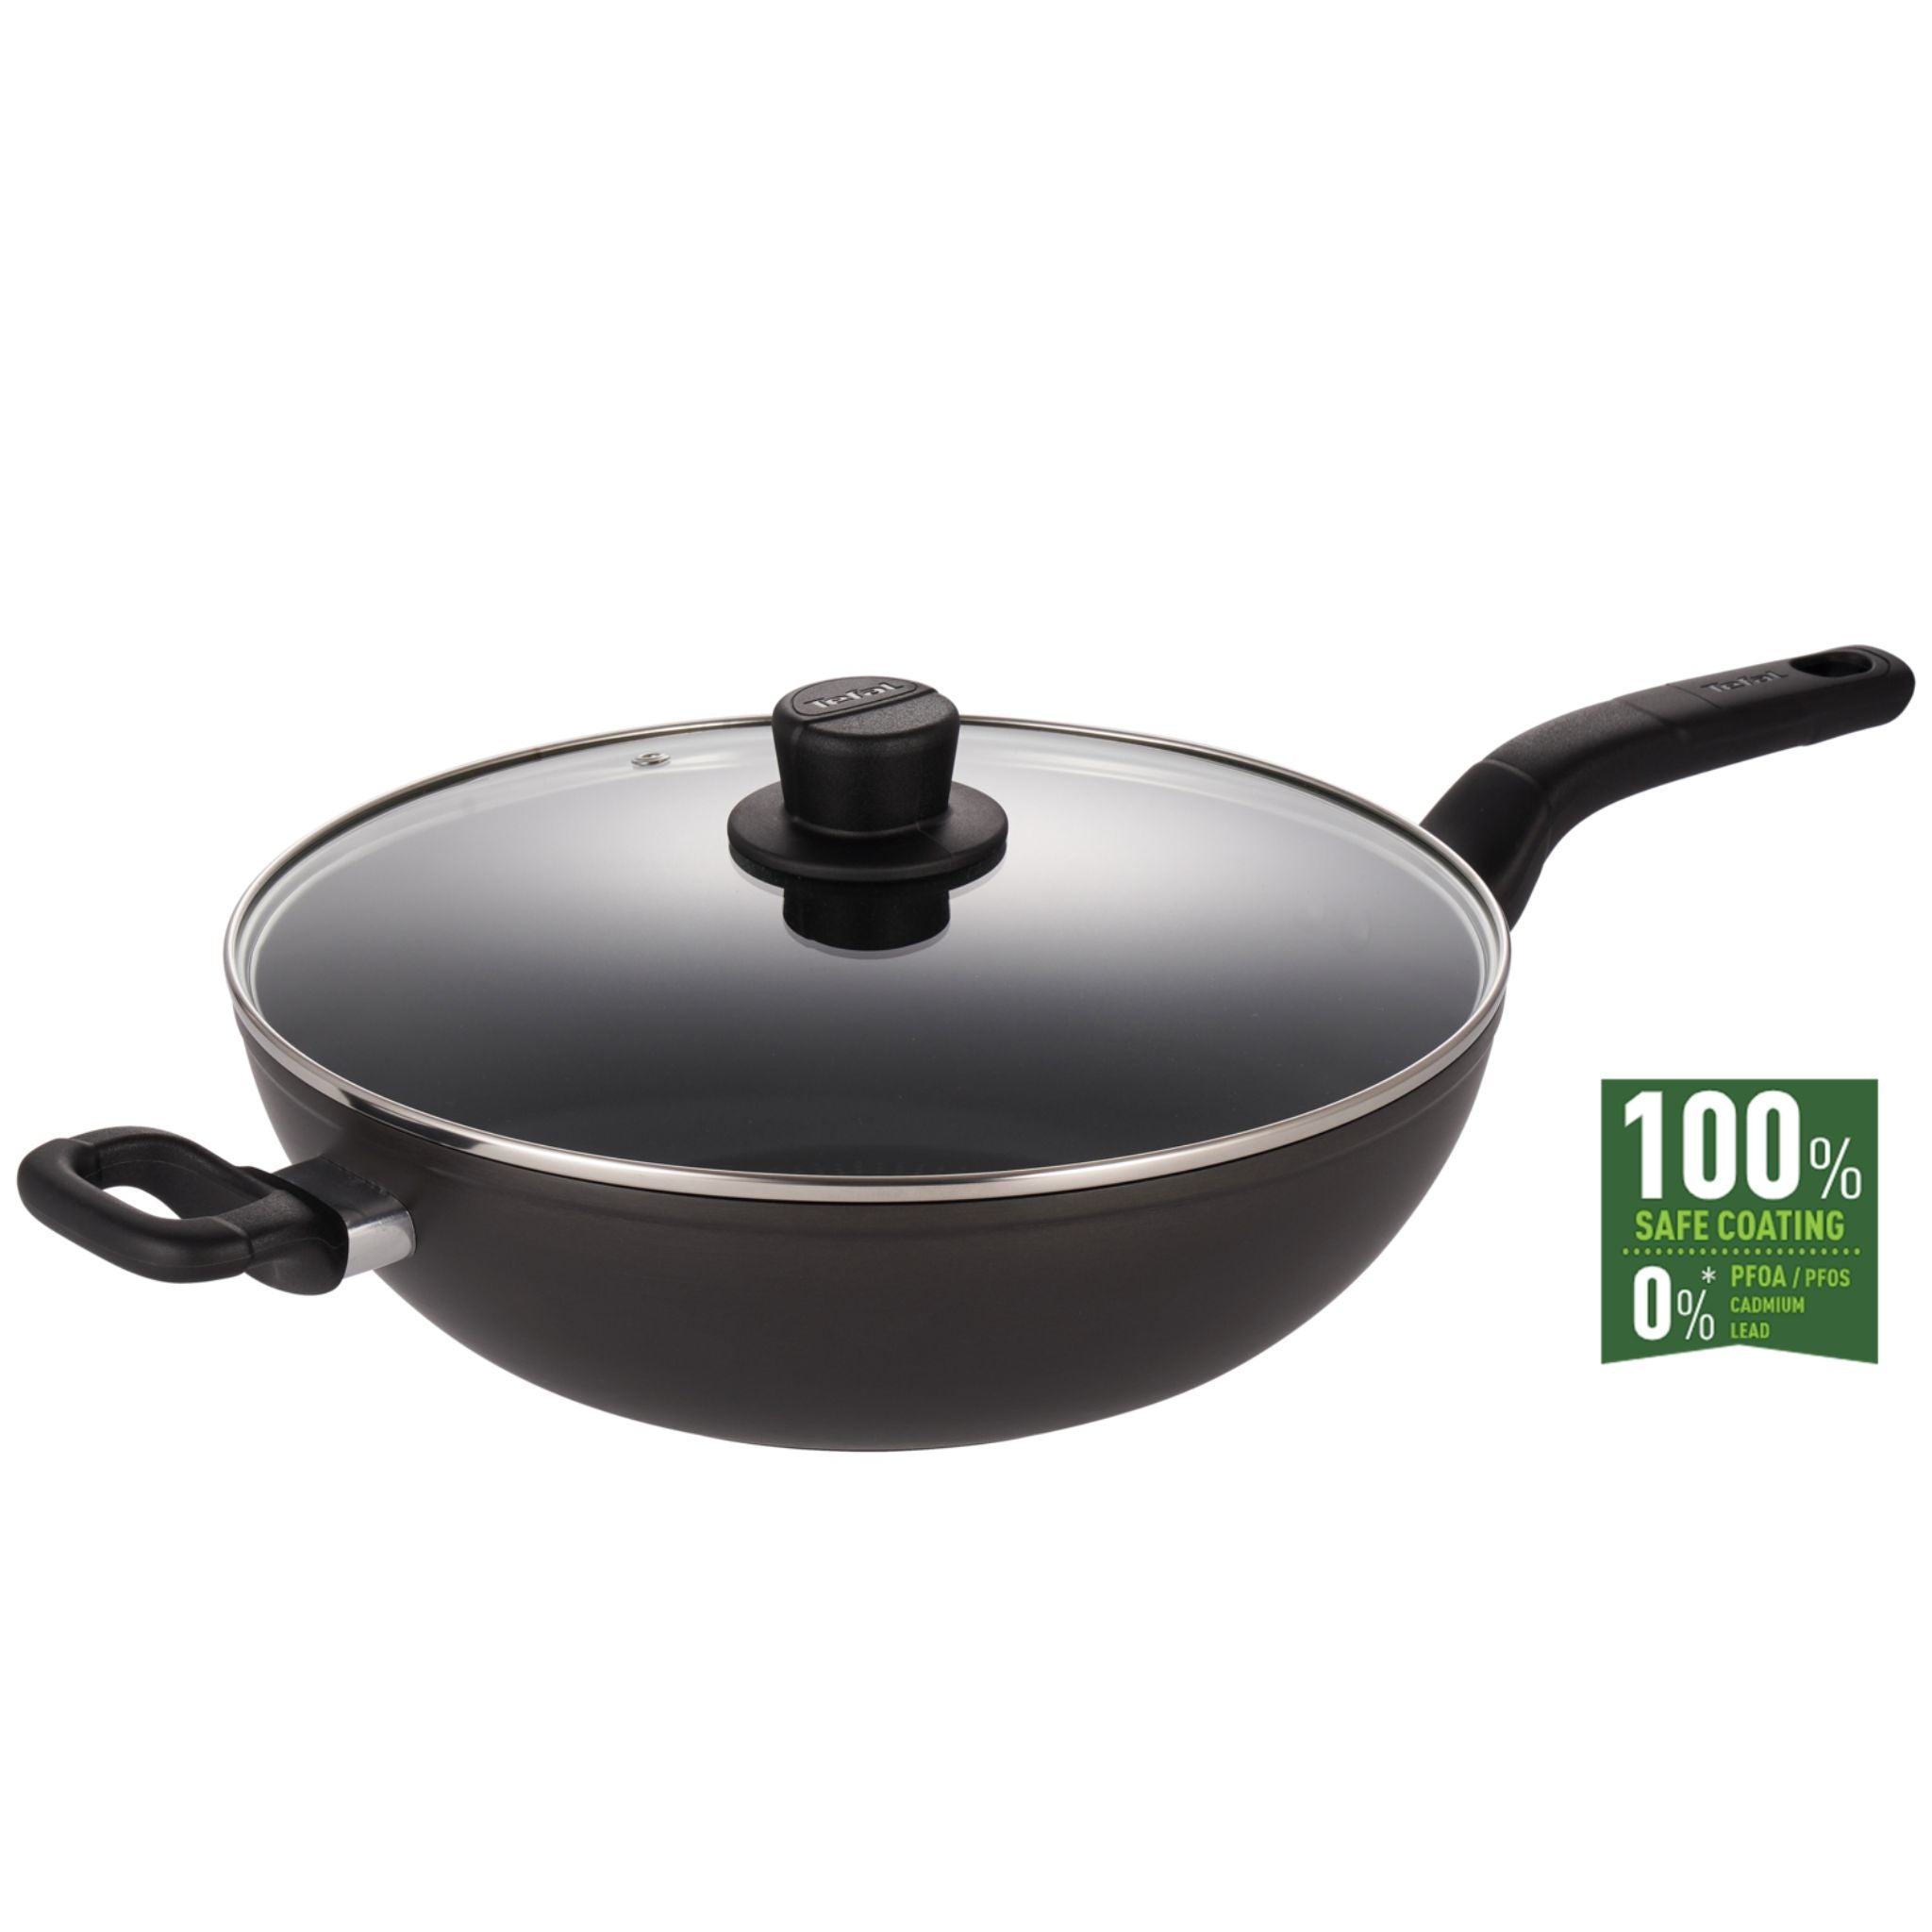 Tefal 32cm Intense Cook Hard Anodized Wok Pan With Lid (Induction